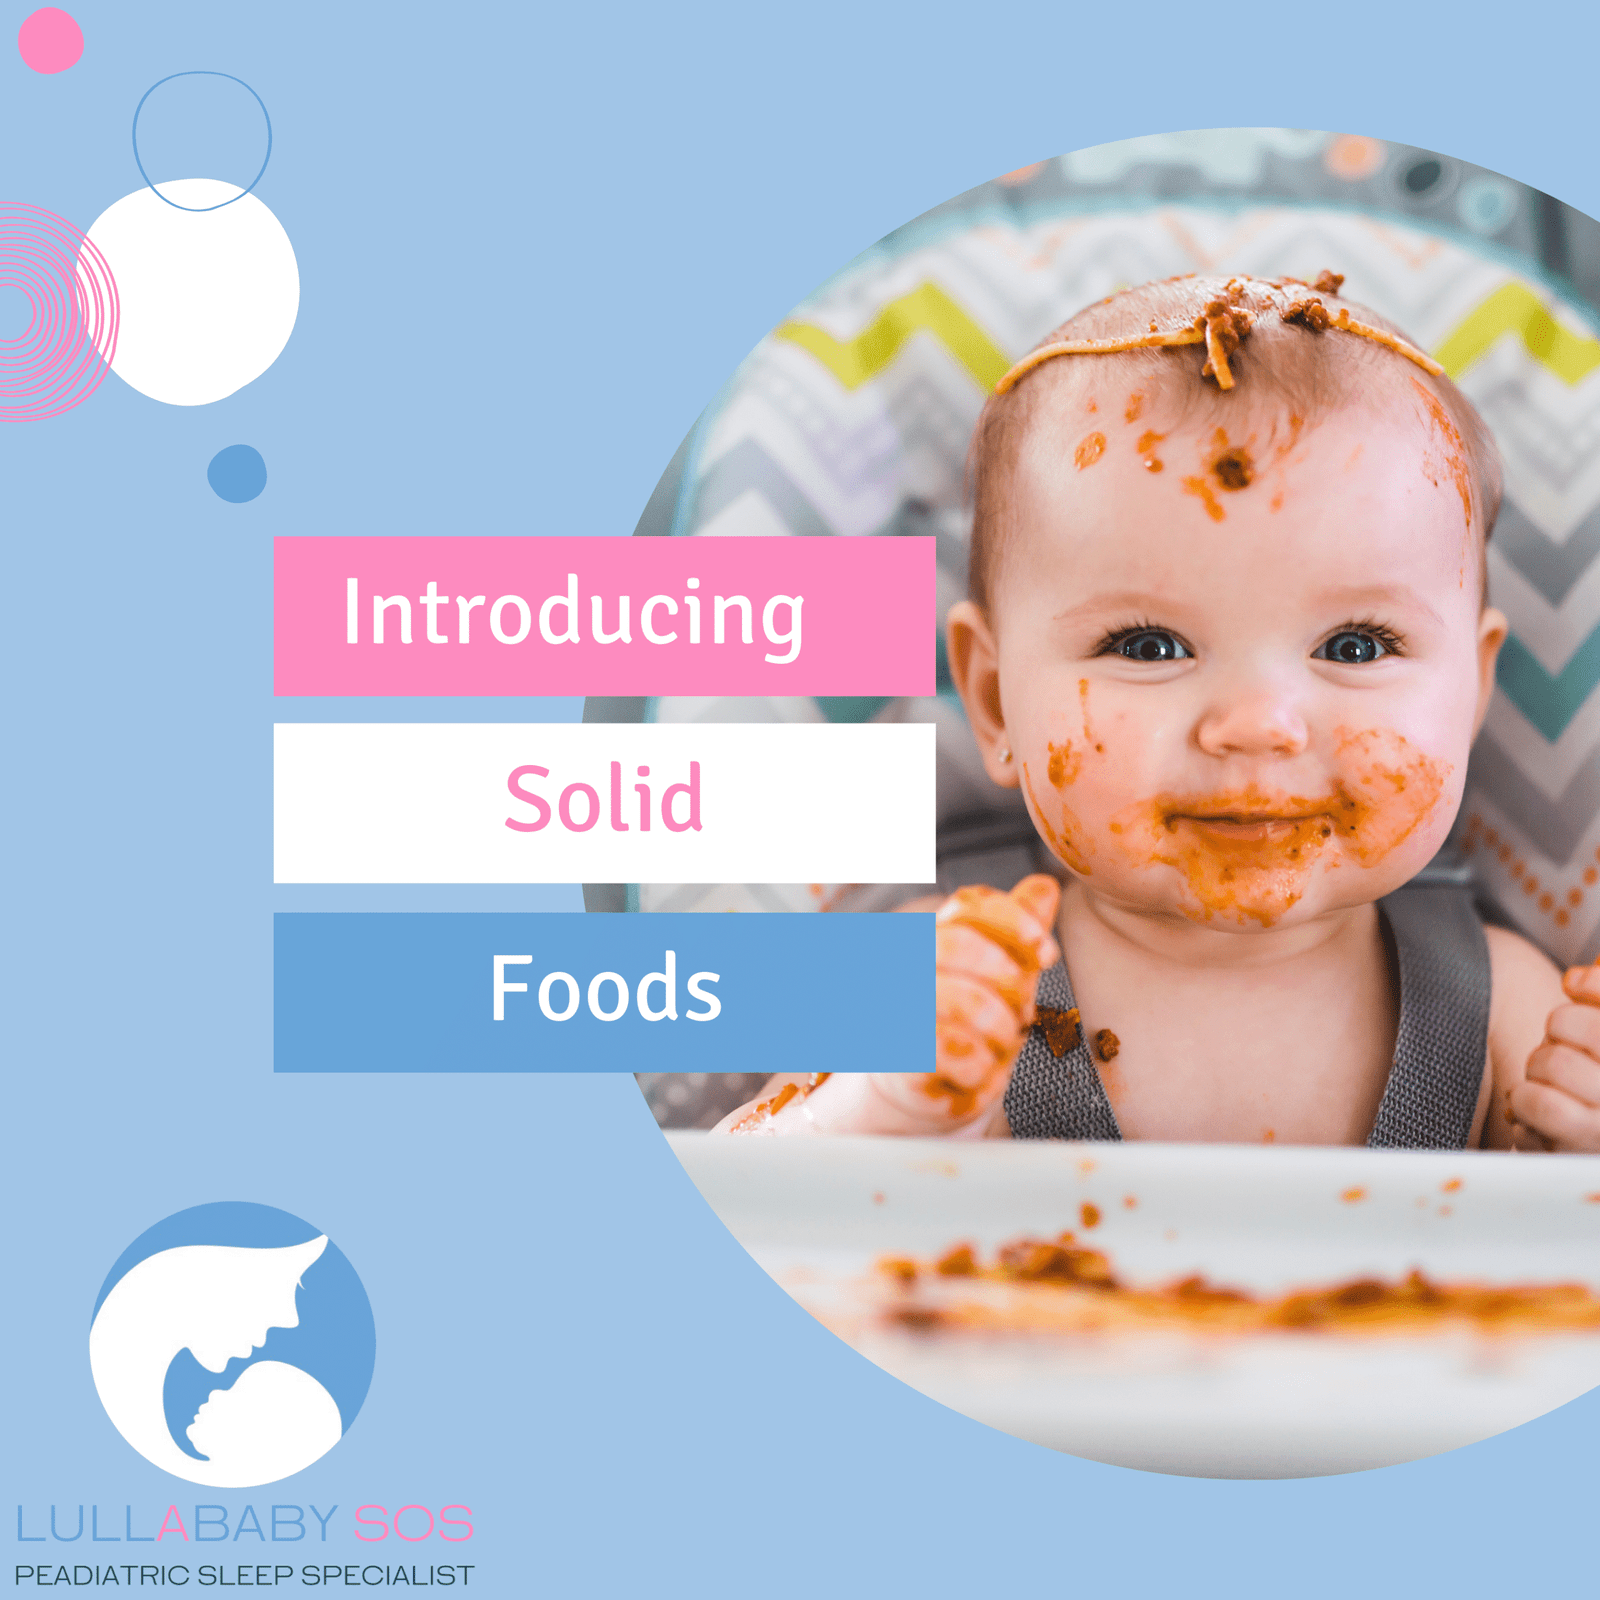 Introducing solids